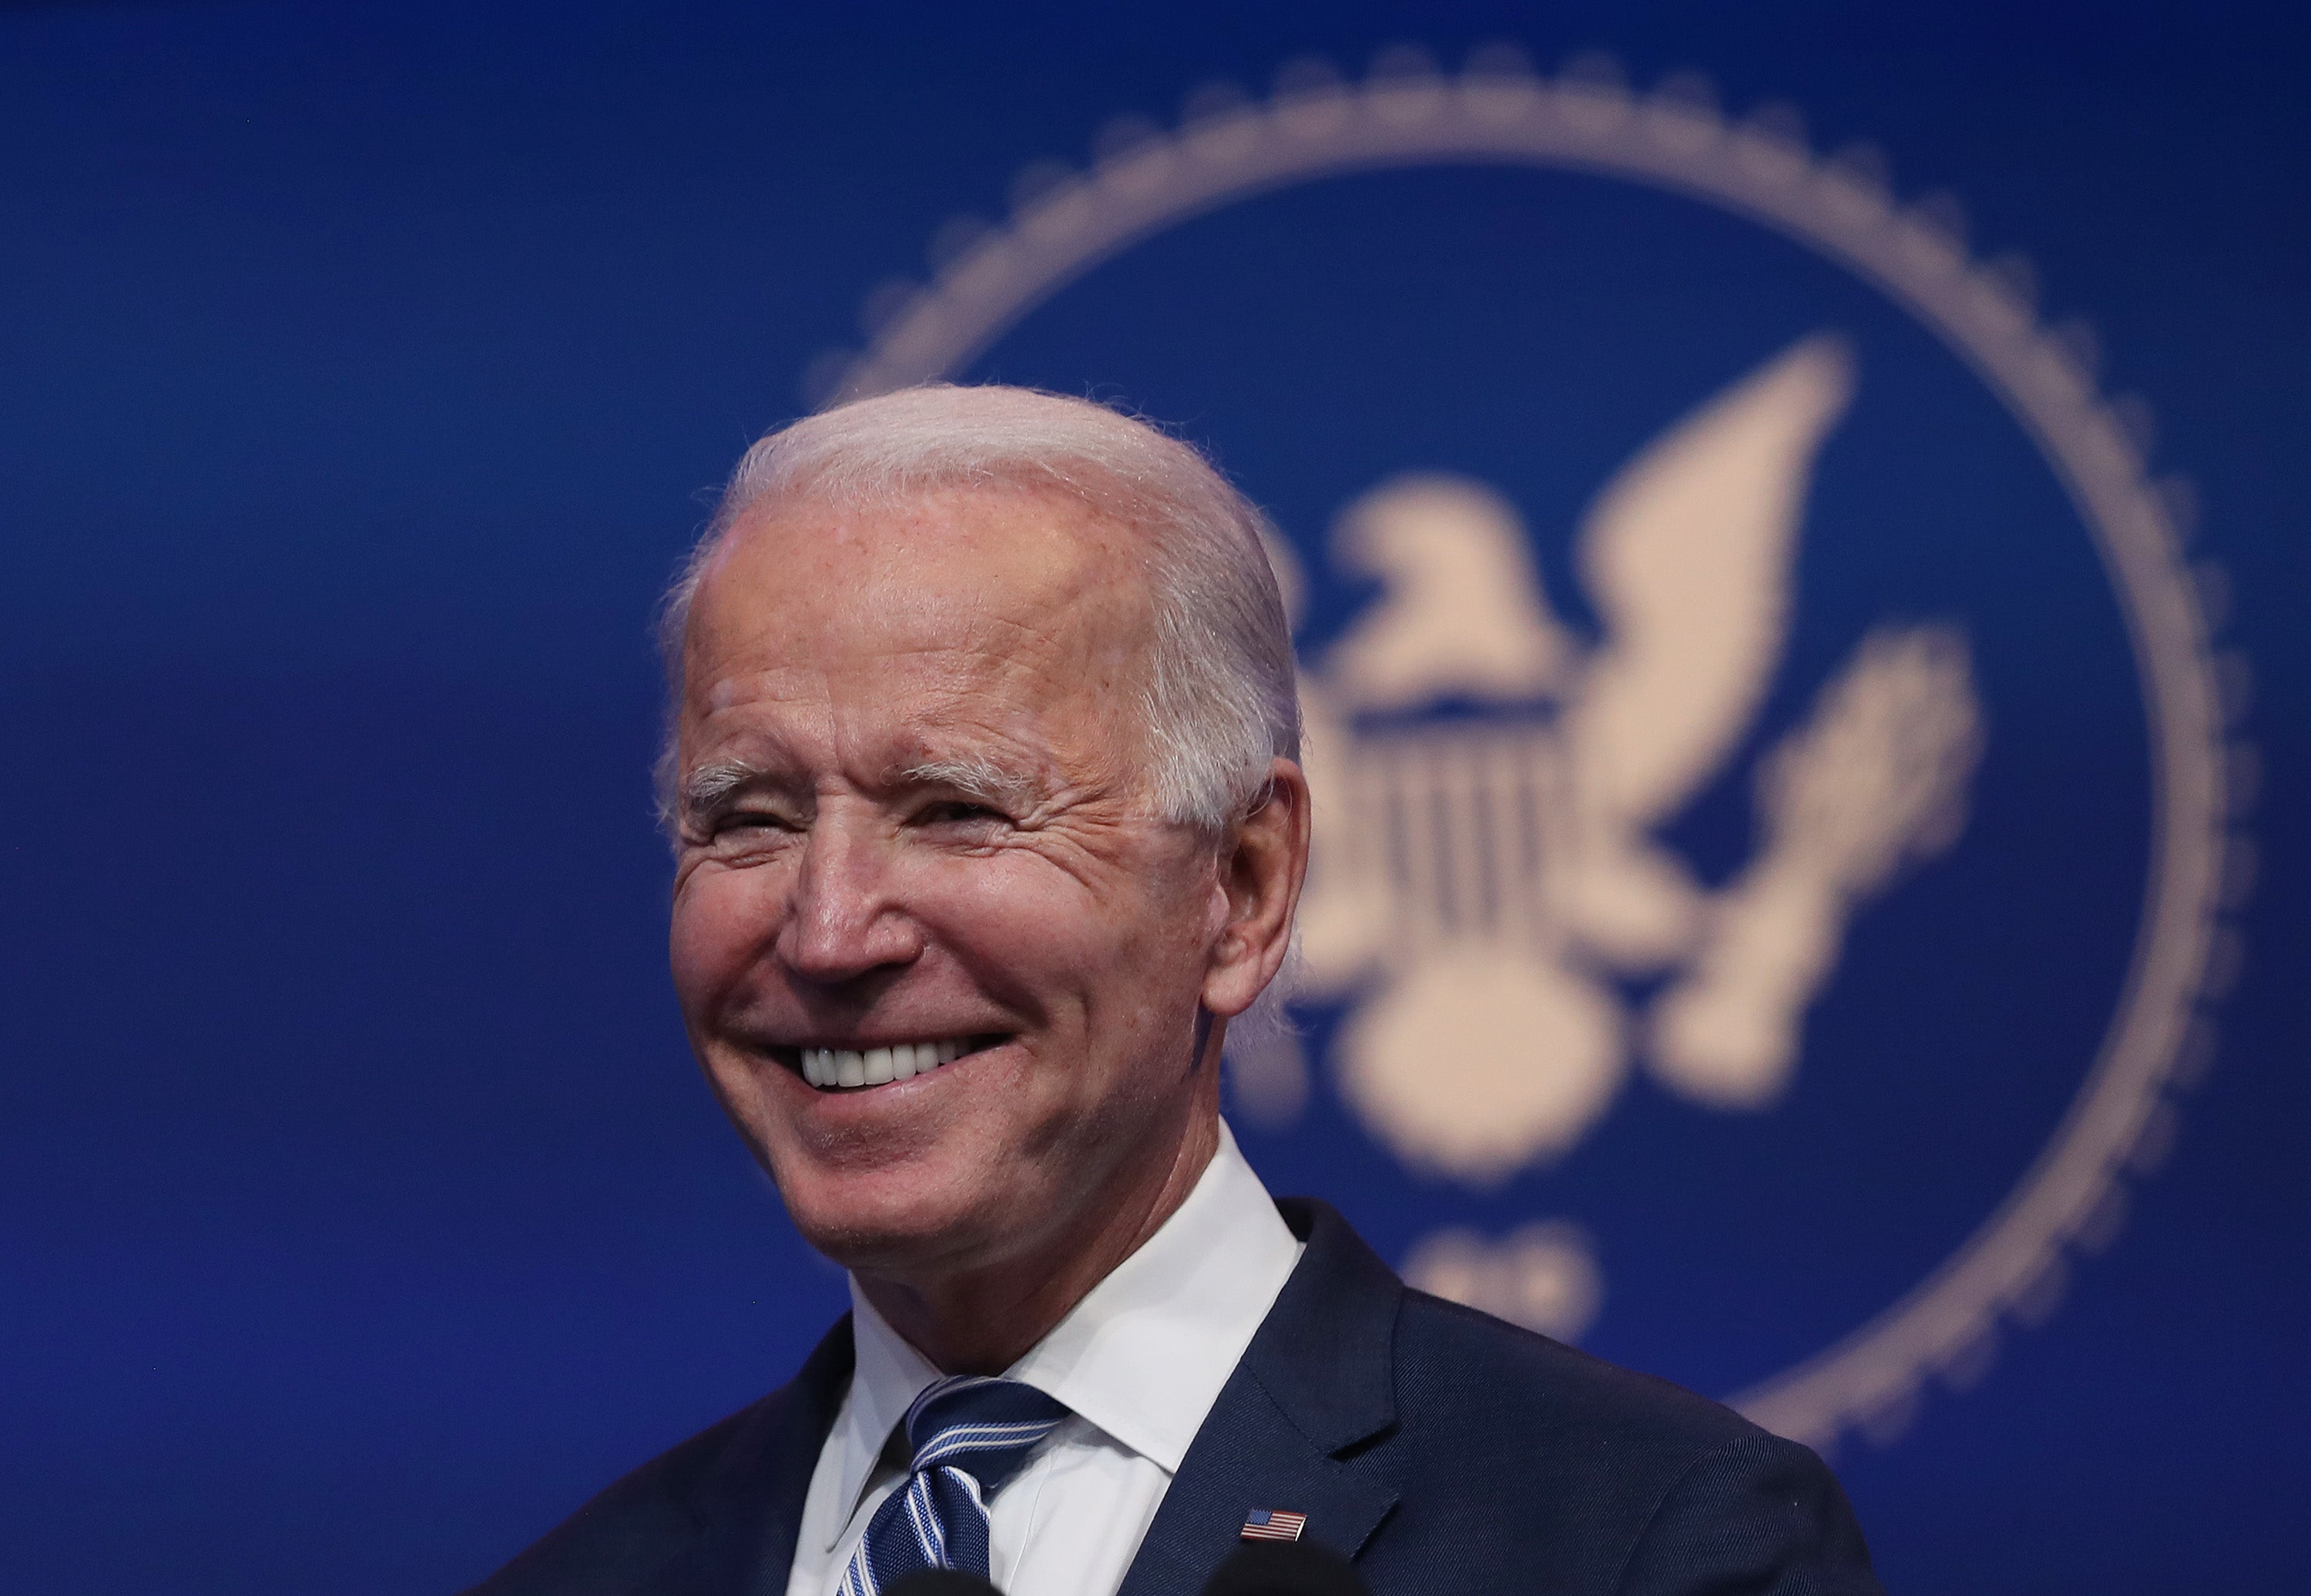 Joe Biden has pledged to reset tense relationships with America’s allies in Europe